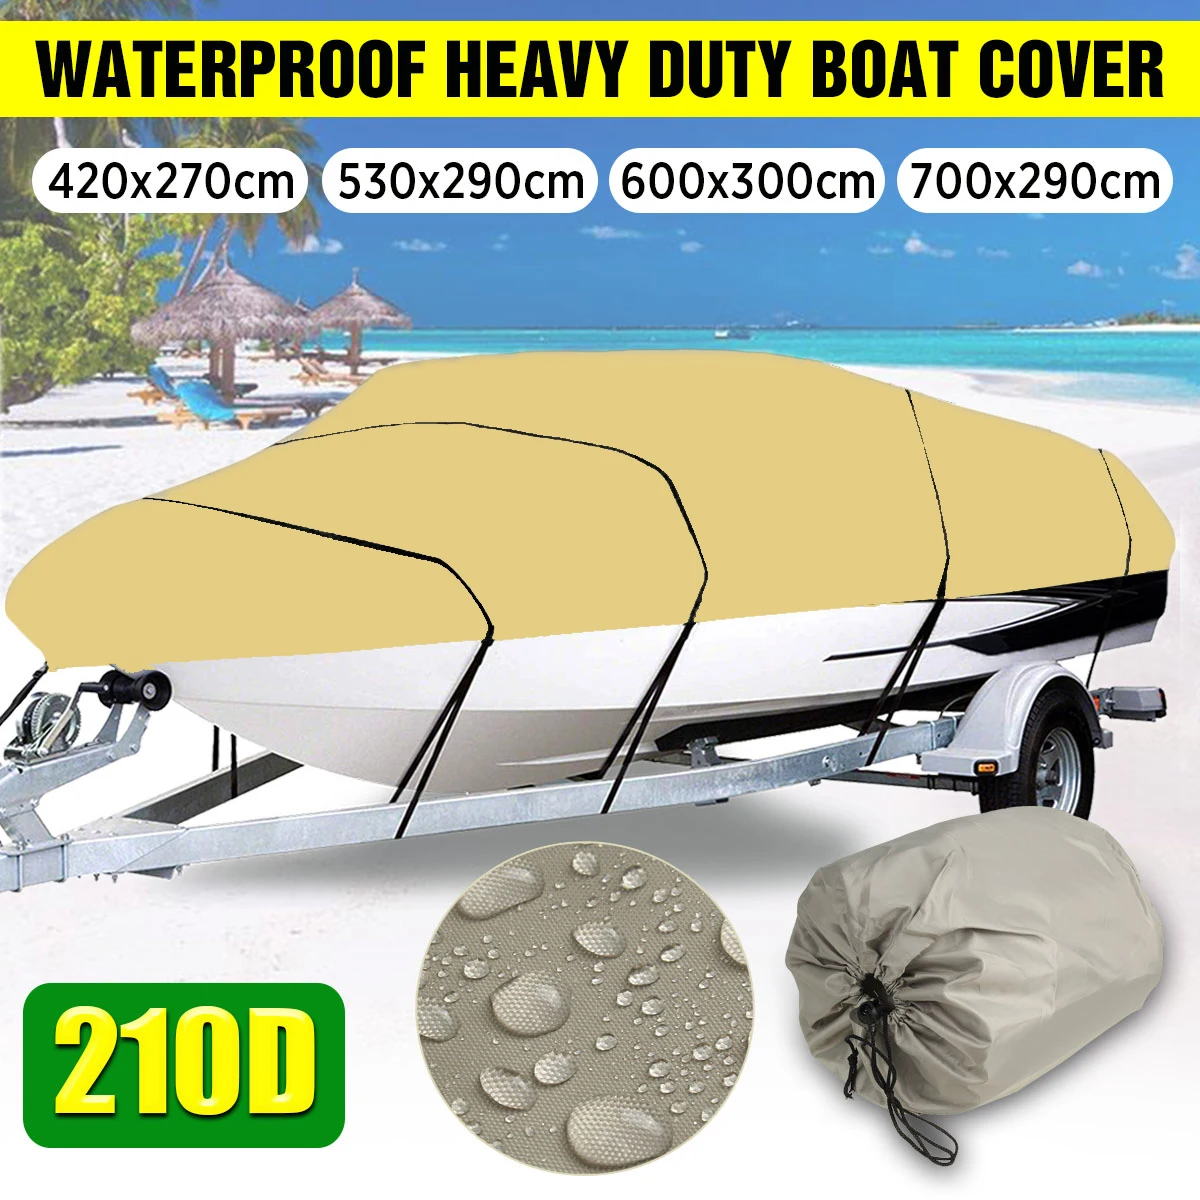 210D 11-22FT Heavy Duty Boat Cover For Fish Ski Bass V-Hull Runabouts Waterproof 2543 desert air filter assembly heavy duty truck haoman h3h5 ace ruishi lishi tengshi 777b air filter cover